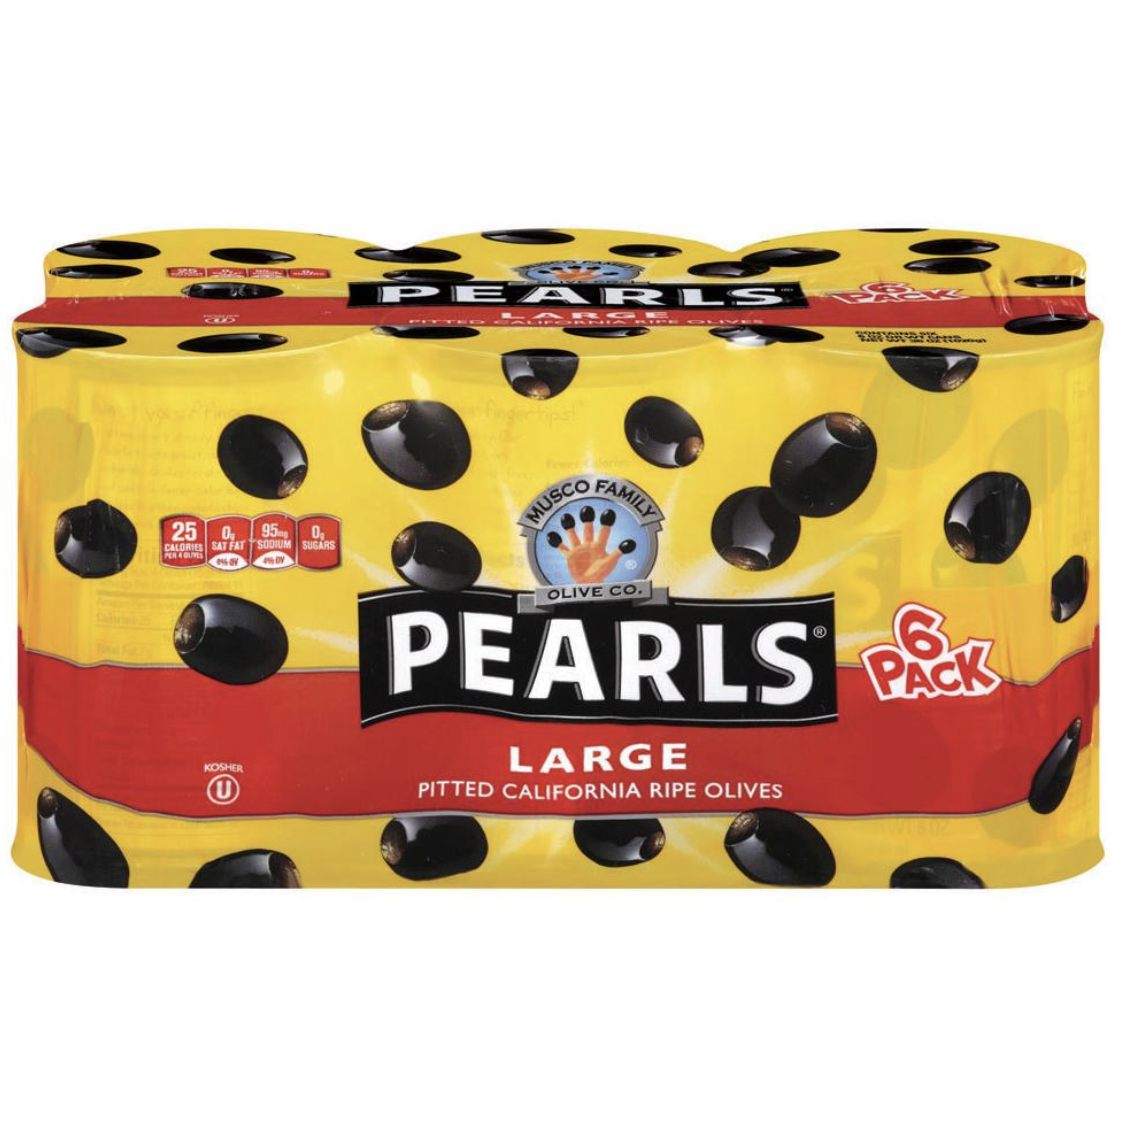 Musco Black Pearl Large Pitted Olives, 6 ct./6 oz.